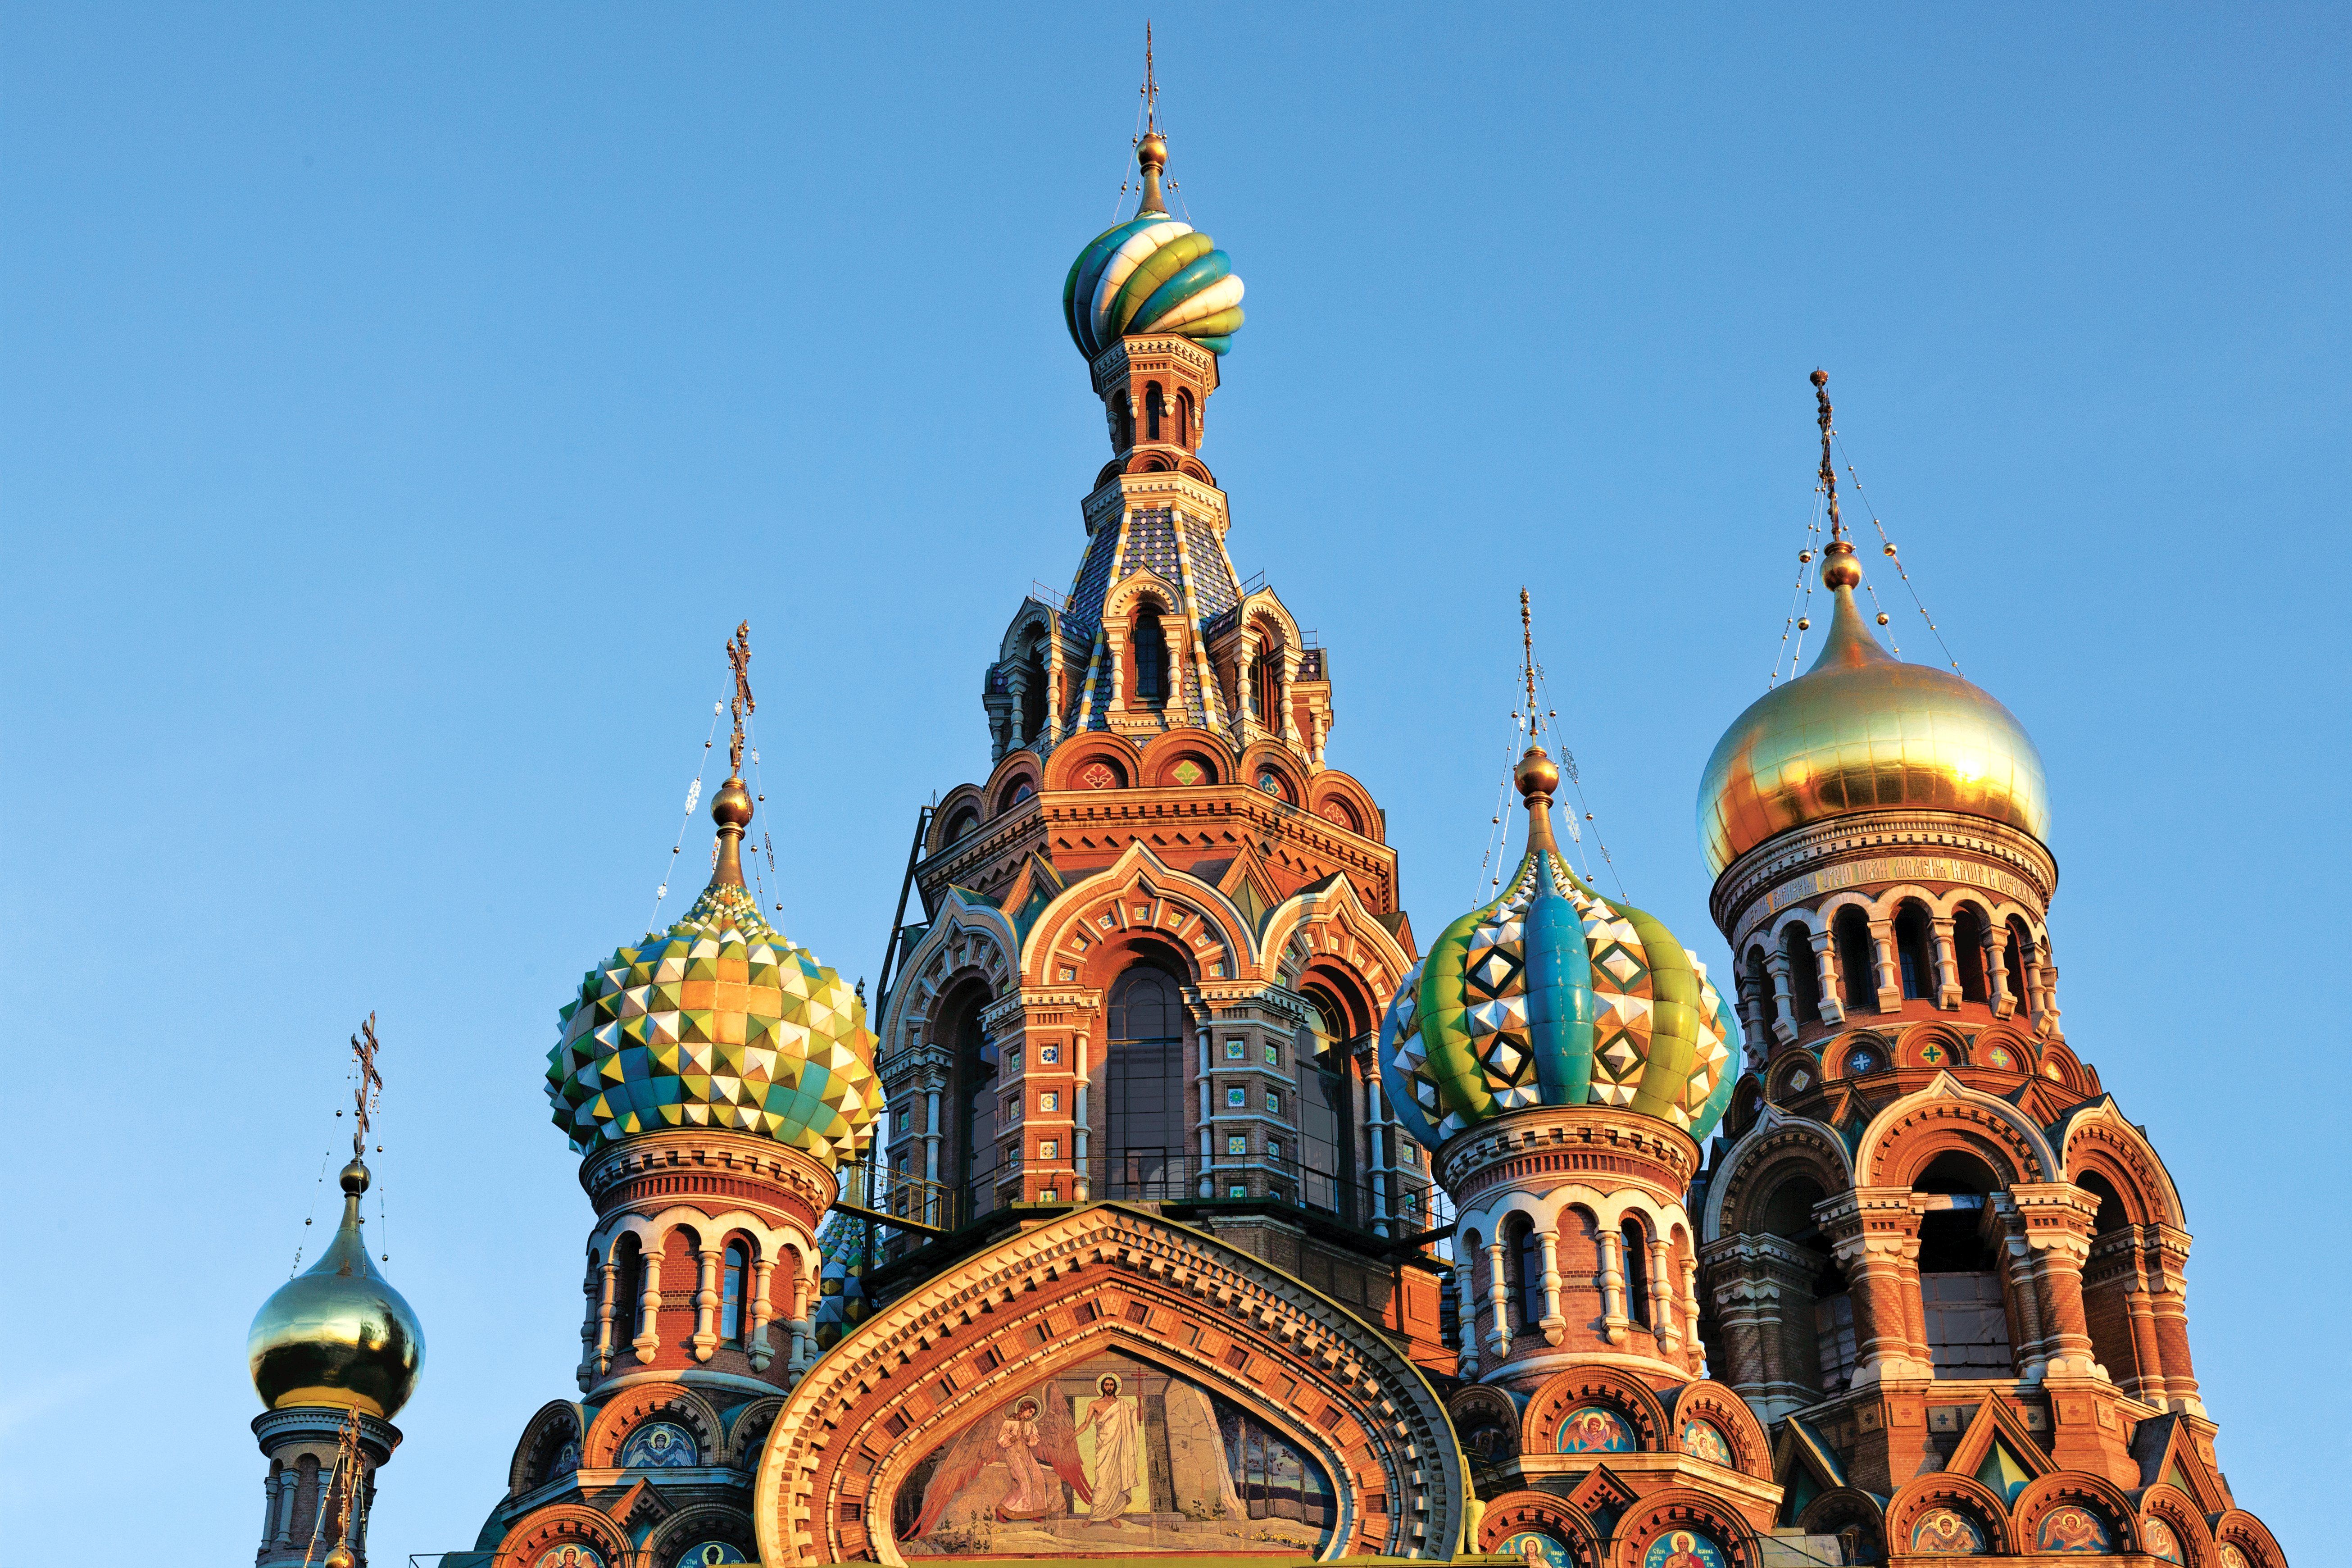 St Petersburg, Russia's, Church on the Spilled Blood is one of the ...